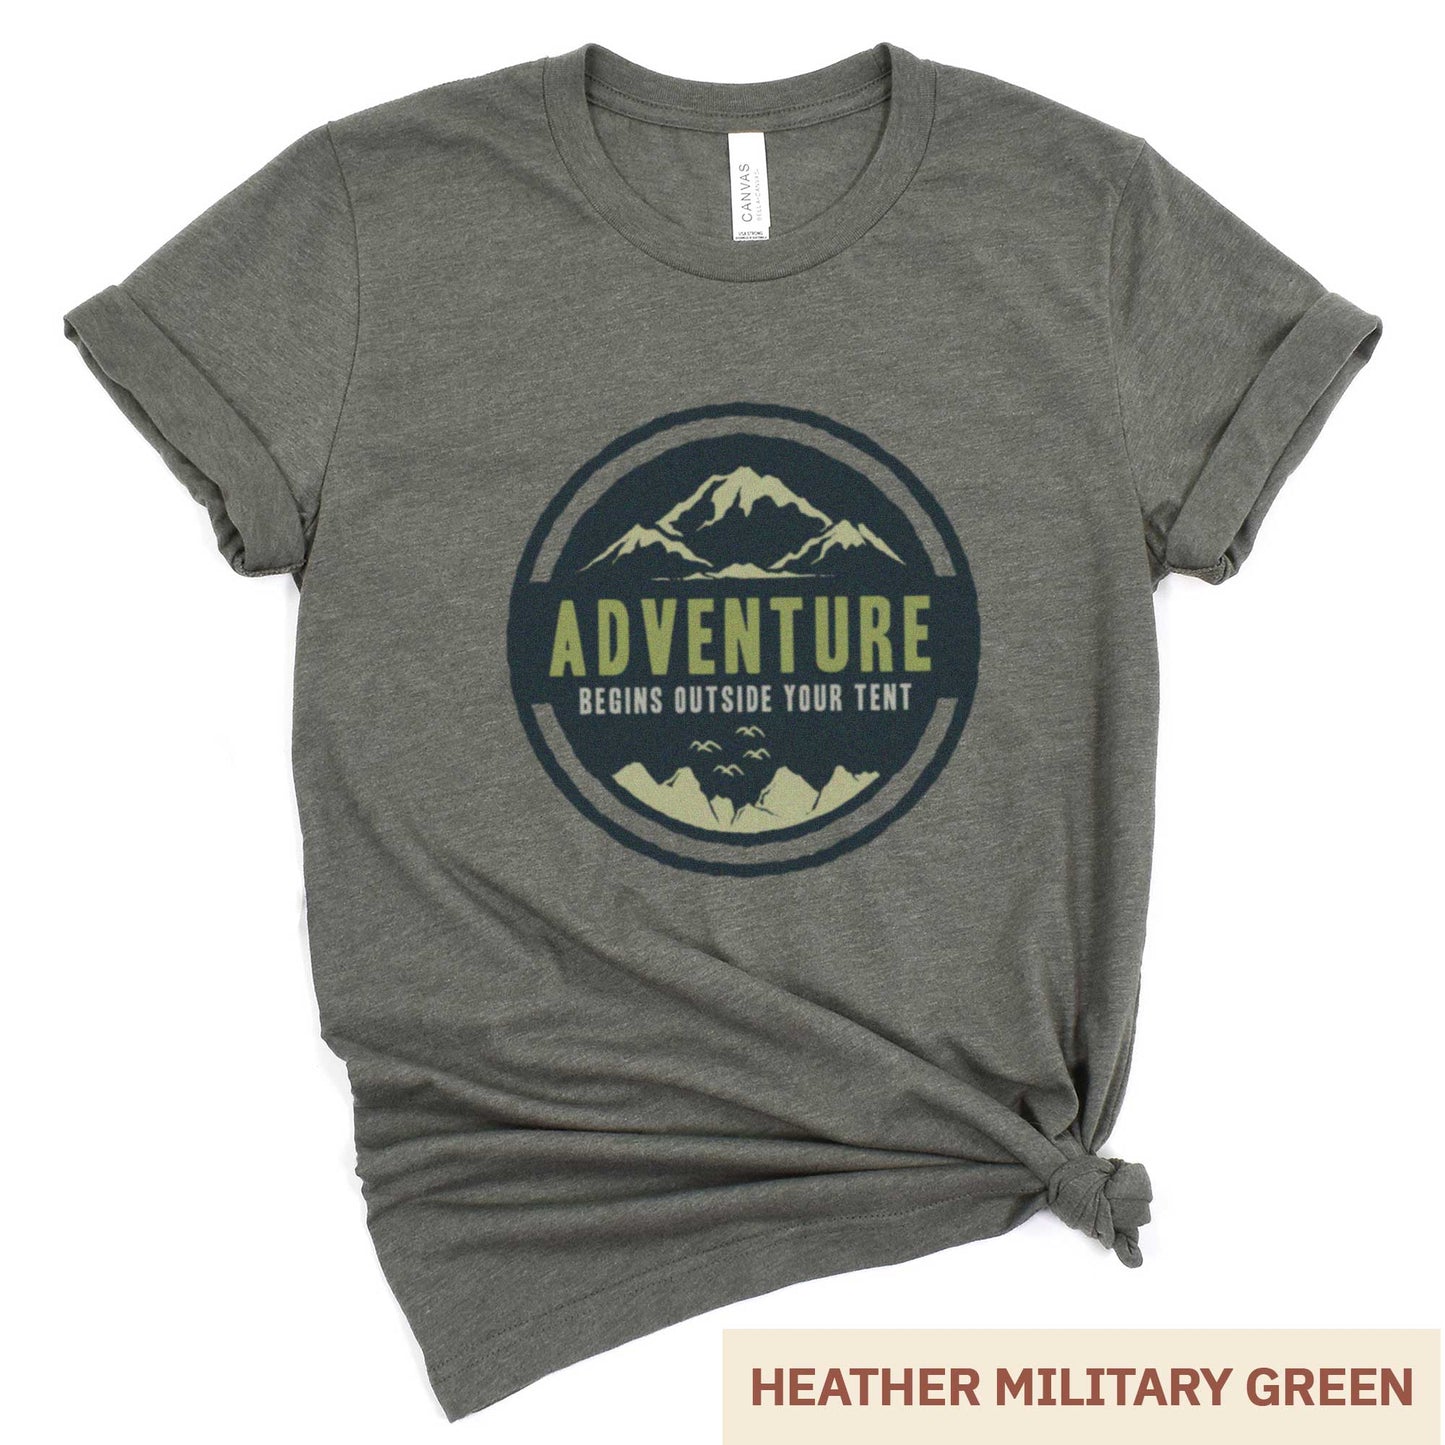 A heather military green Bella Canvas t-shirt that says adventure begins outside your tent.